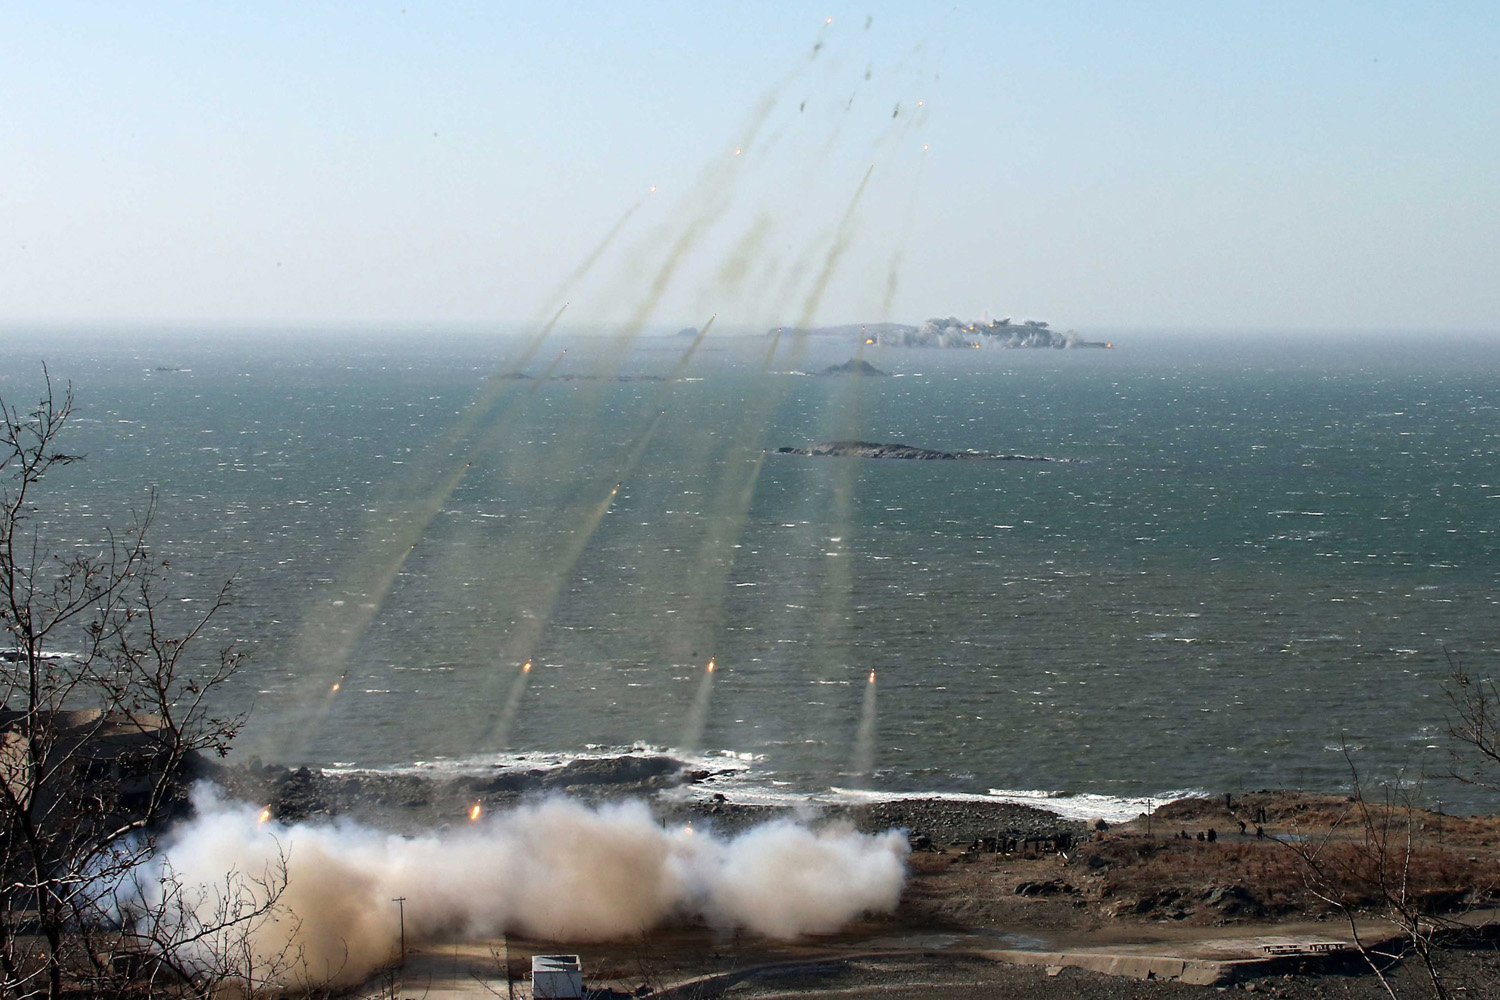 North Korea's artillery sub-units, whose mission is to strike Daeyeonpyeong island and Baengnyeong island of South Korea, conduct a live shell firing drill in the western sector of the front line